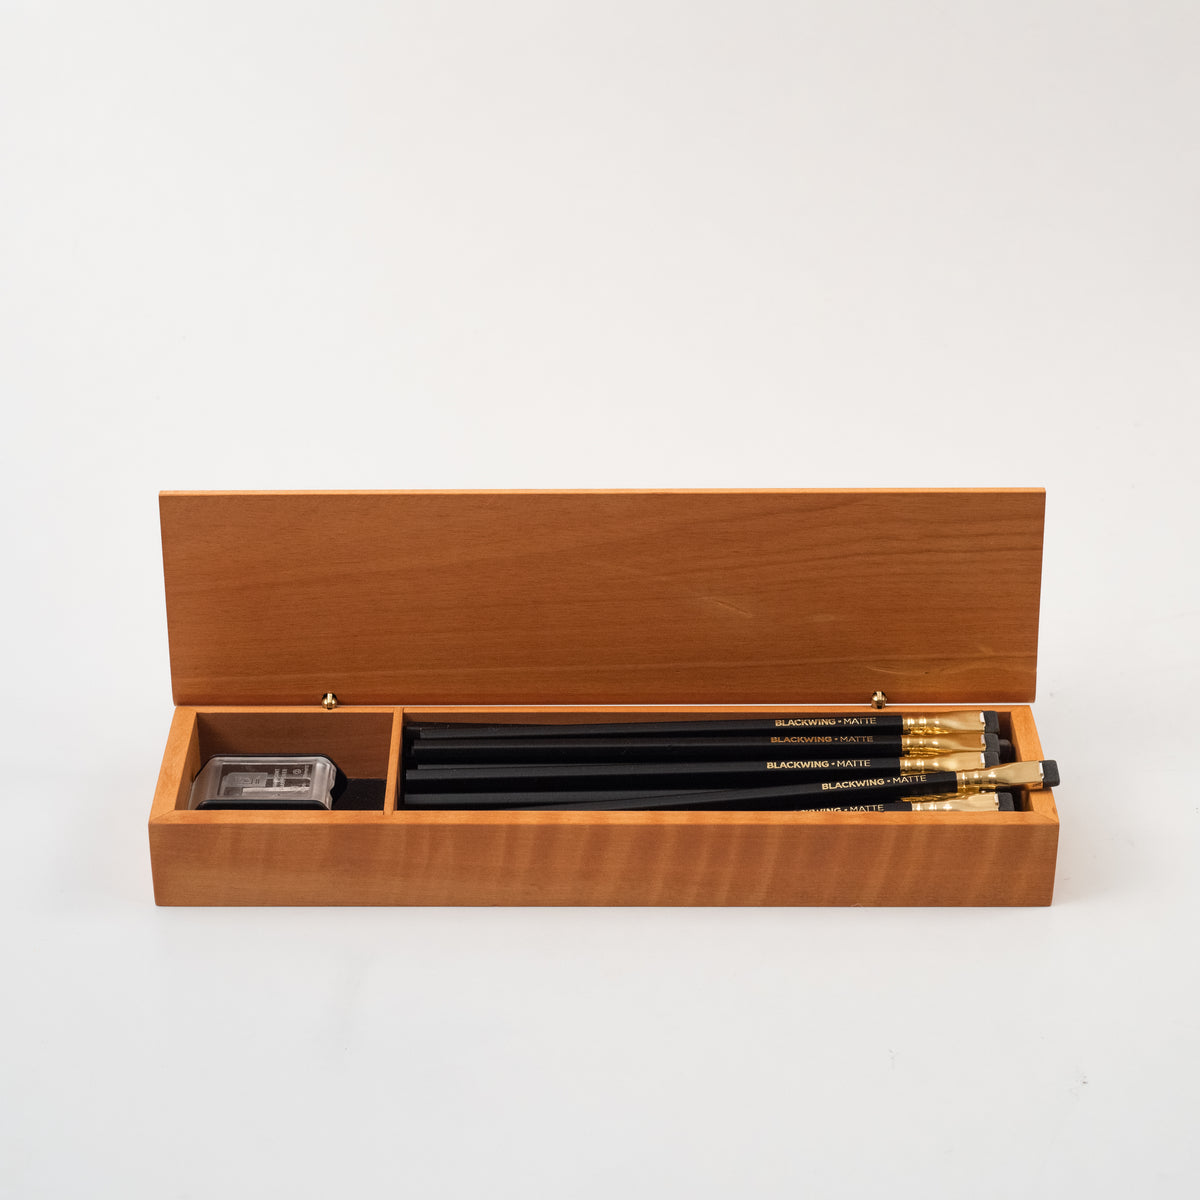 A set of Blackwing French Wood Box pencils in a wooden box.